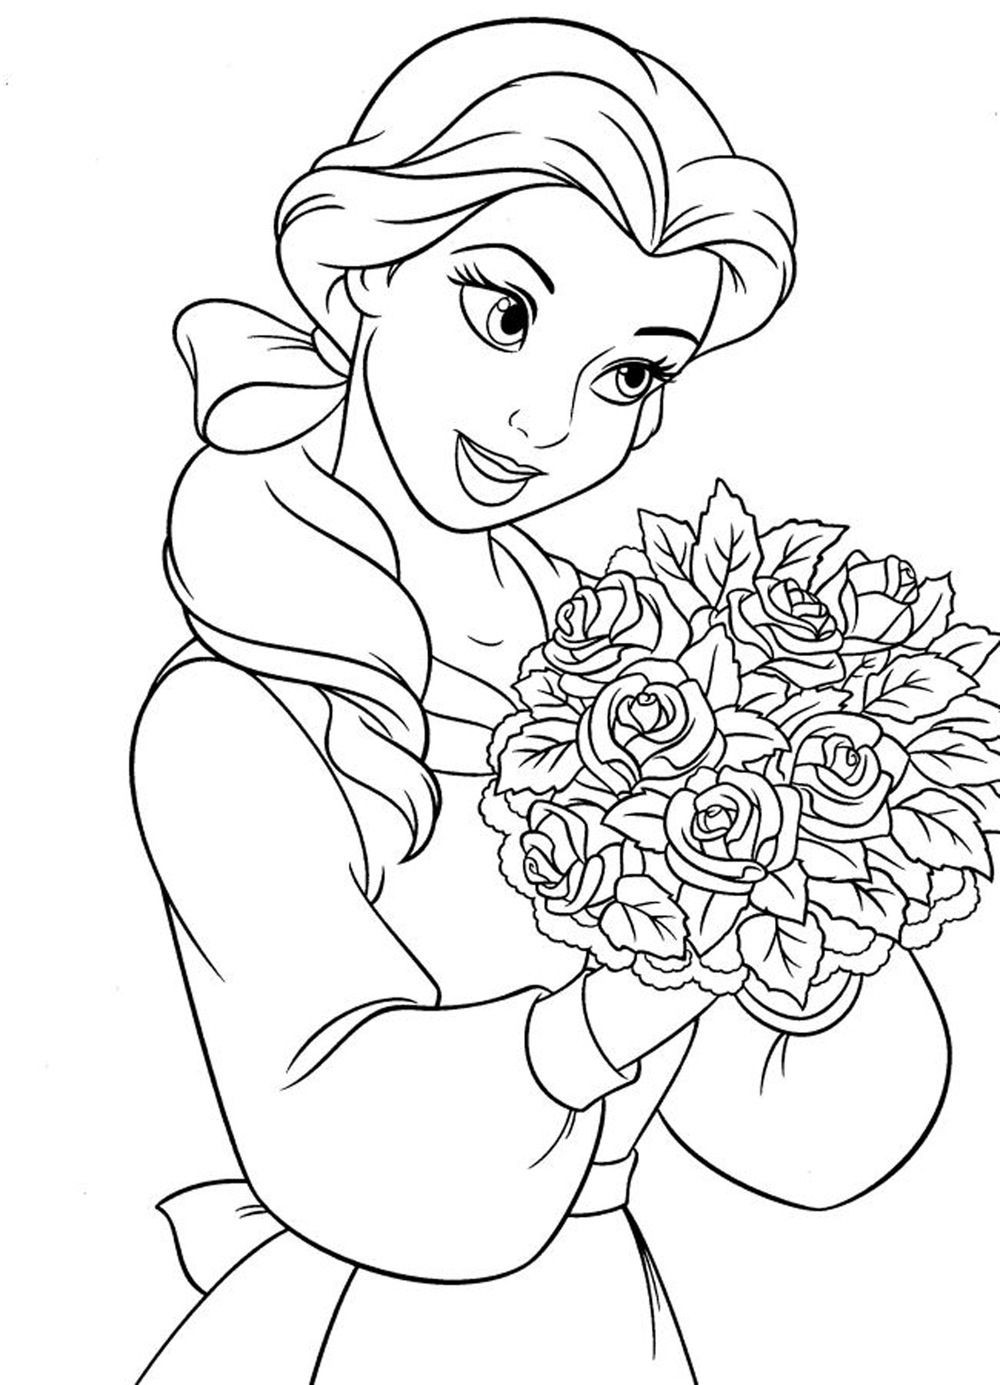 Princess Coloring Books For Girls
 princess coloring pages for girls Free